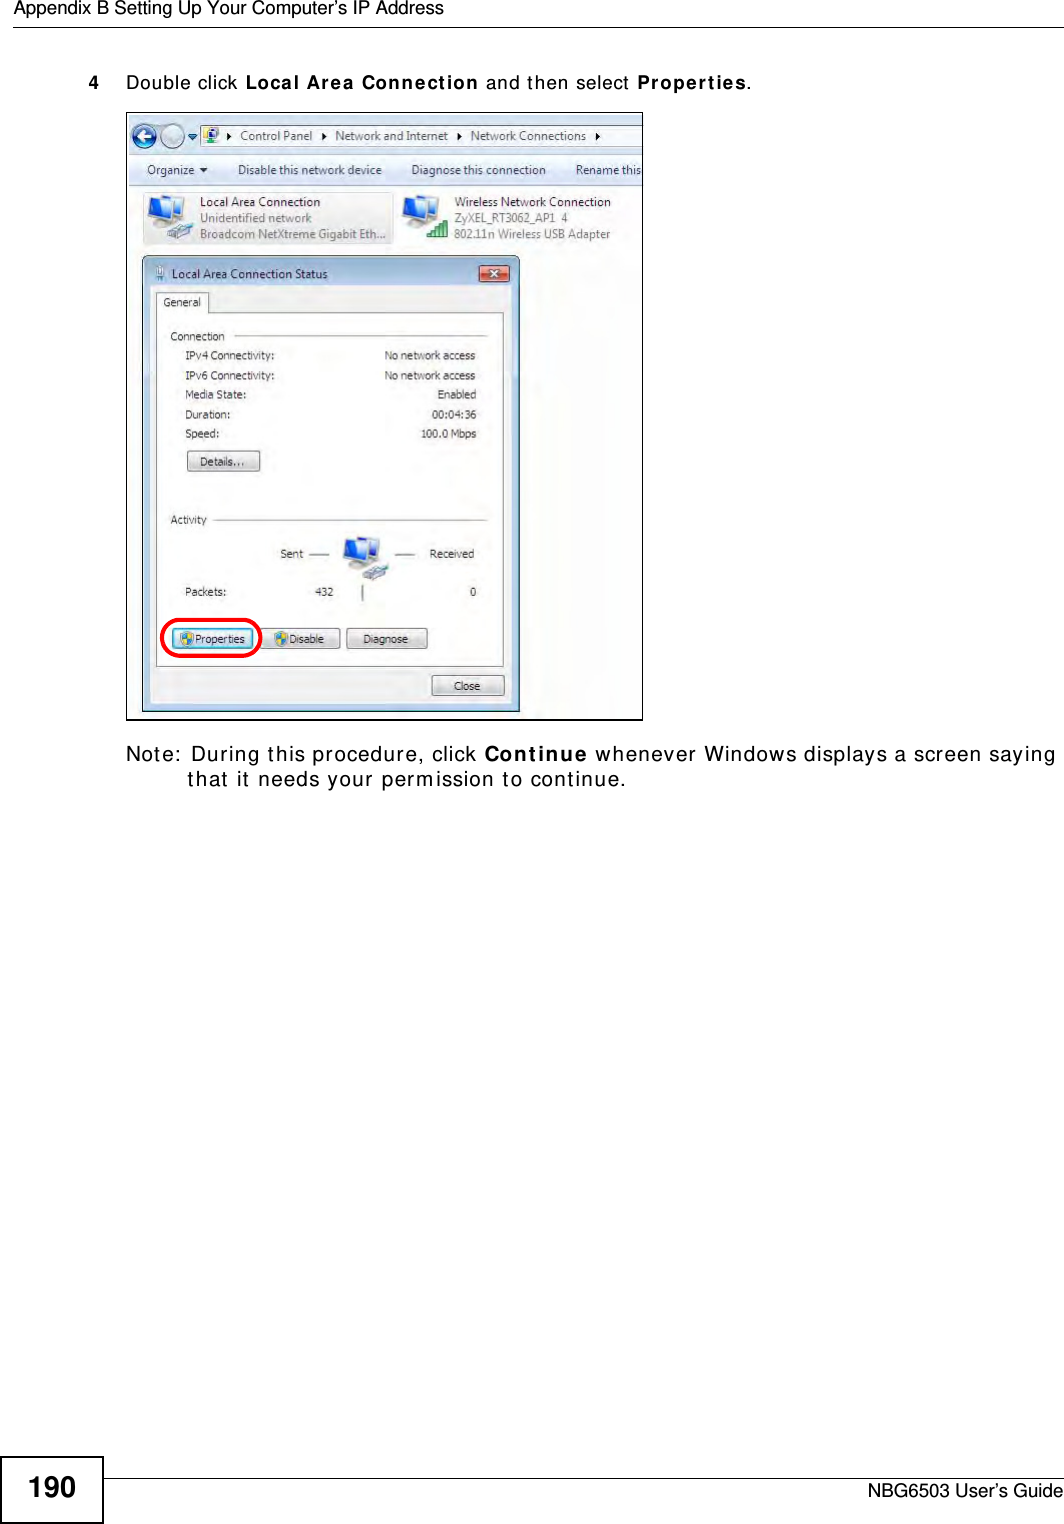 Appendix B Setting Up Your Computer’s IP AddressNBG6503 User’s Guide1904Double click Local Area Connection and then select Properties.Note: During this procedure, click Continue whenever Windows displays a screen saying that it needs your permission to continue.